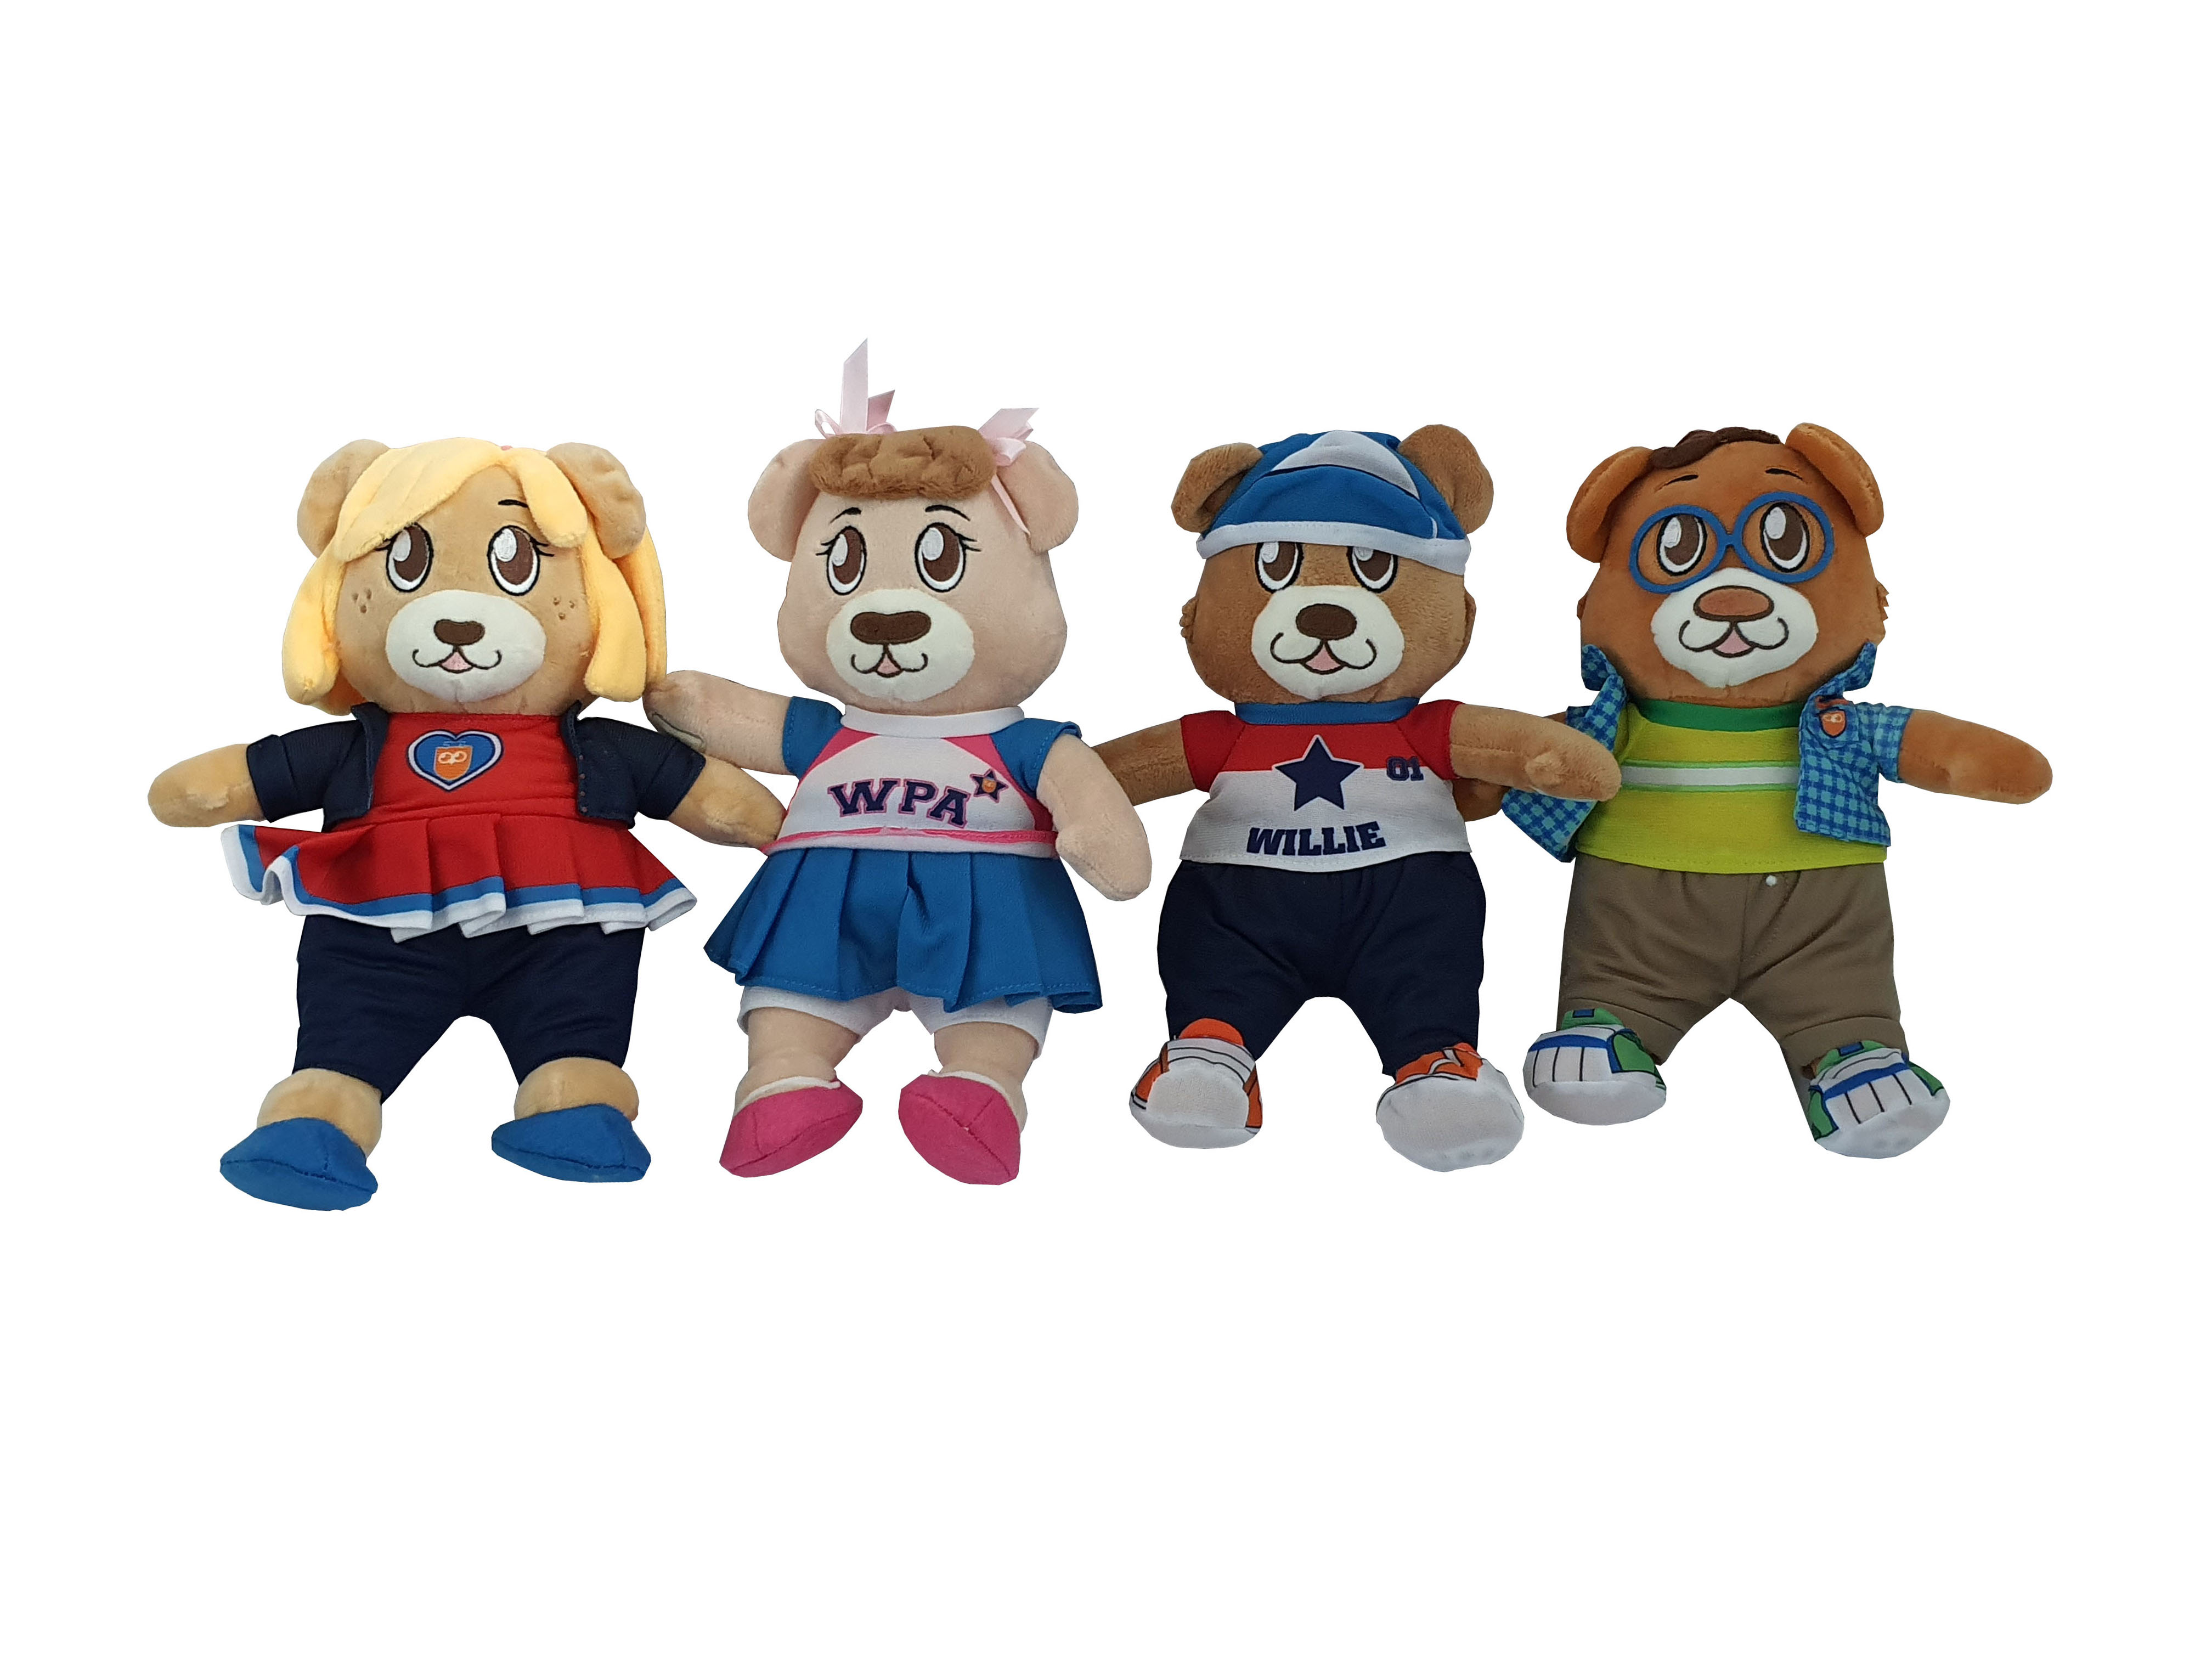 Soft Toys Supplier In Singapore Cyber